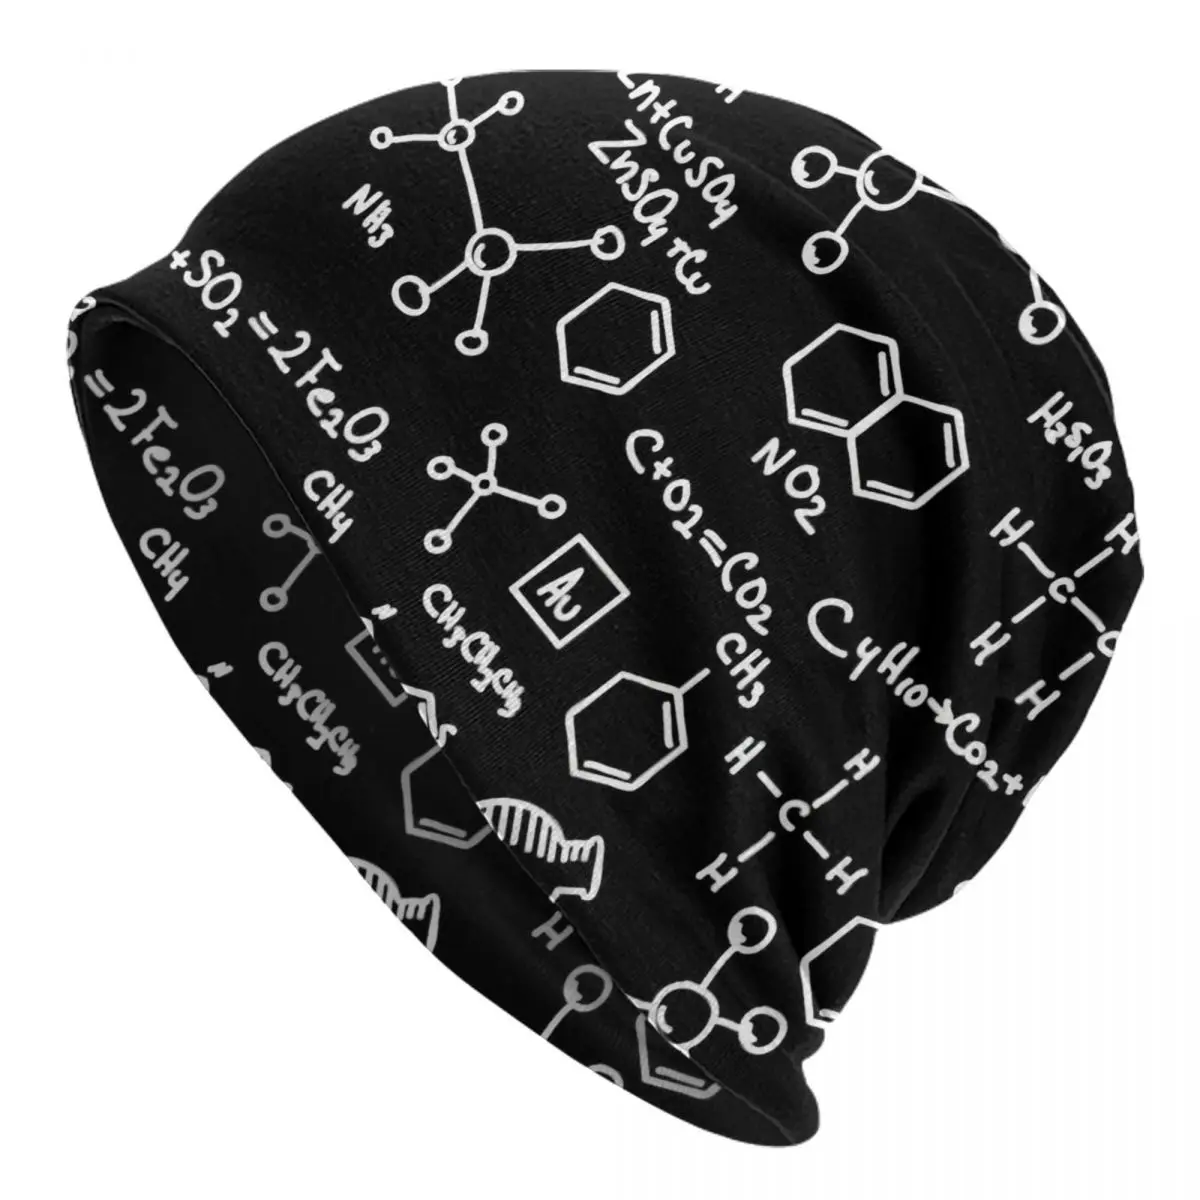 Science Chemistry Pattern Adult Men's Women's Knit Hat Keep warm winter Funny knitted hat